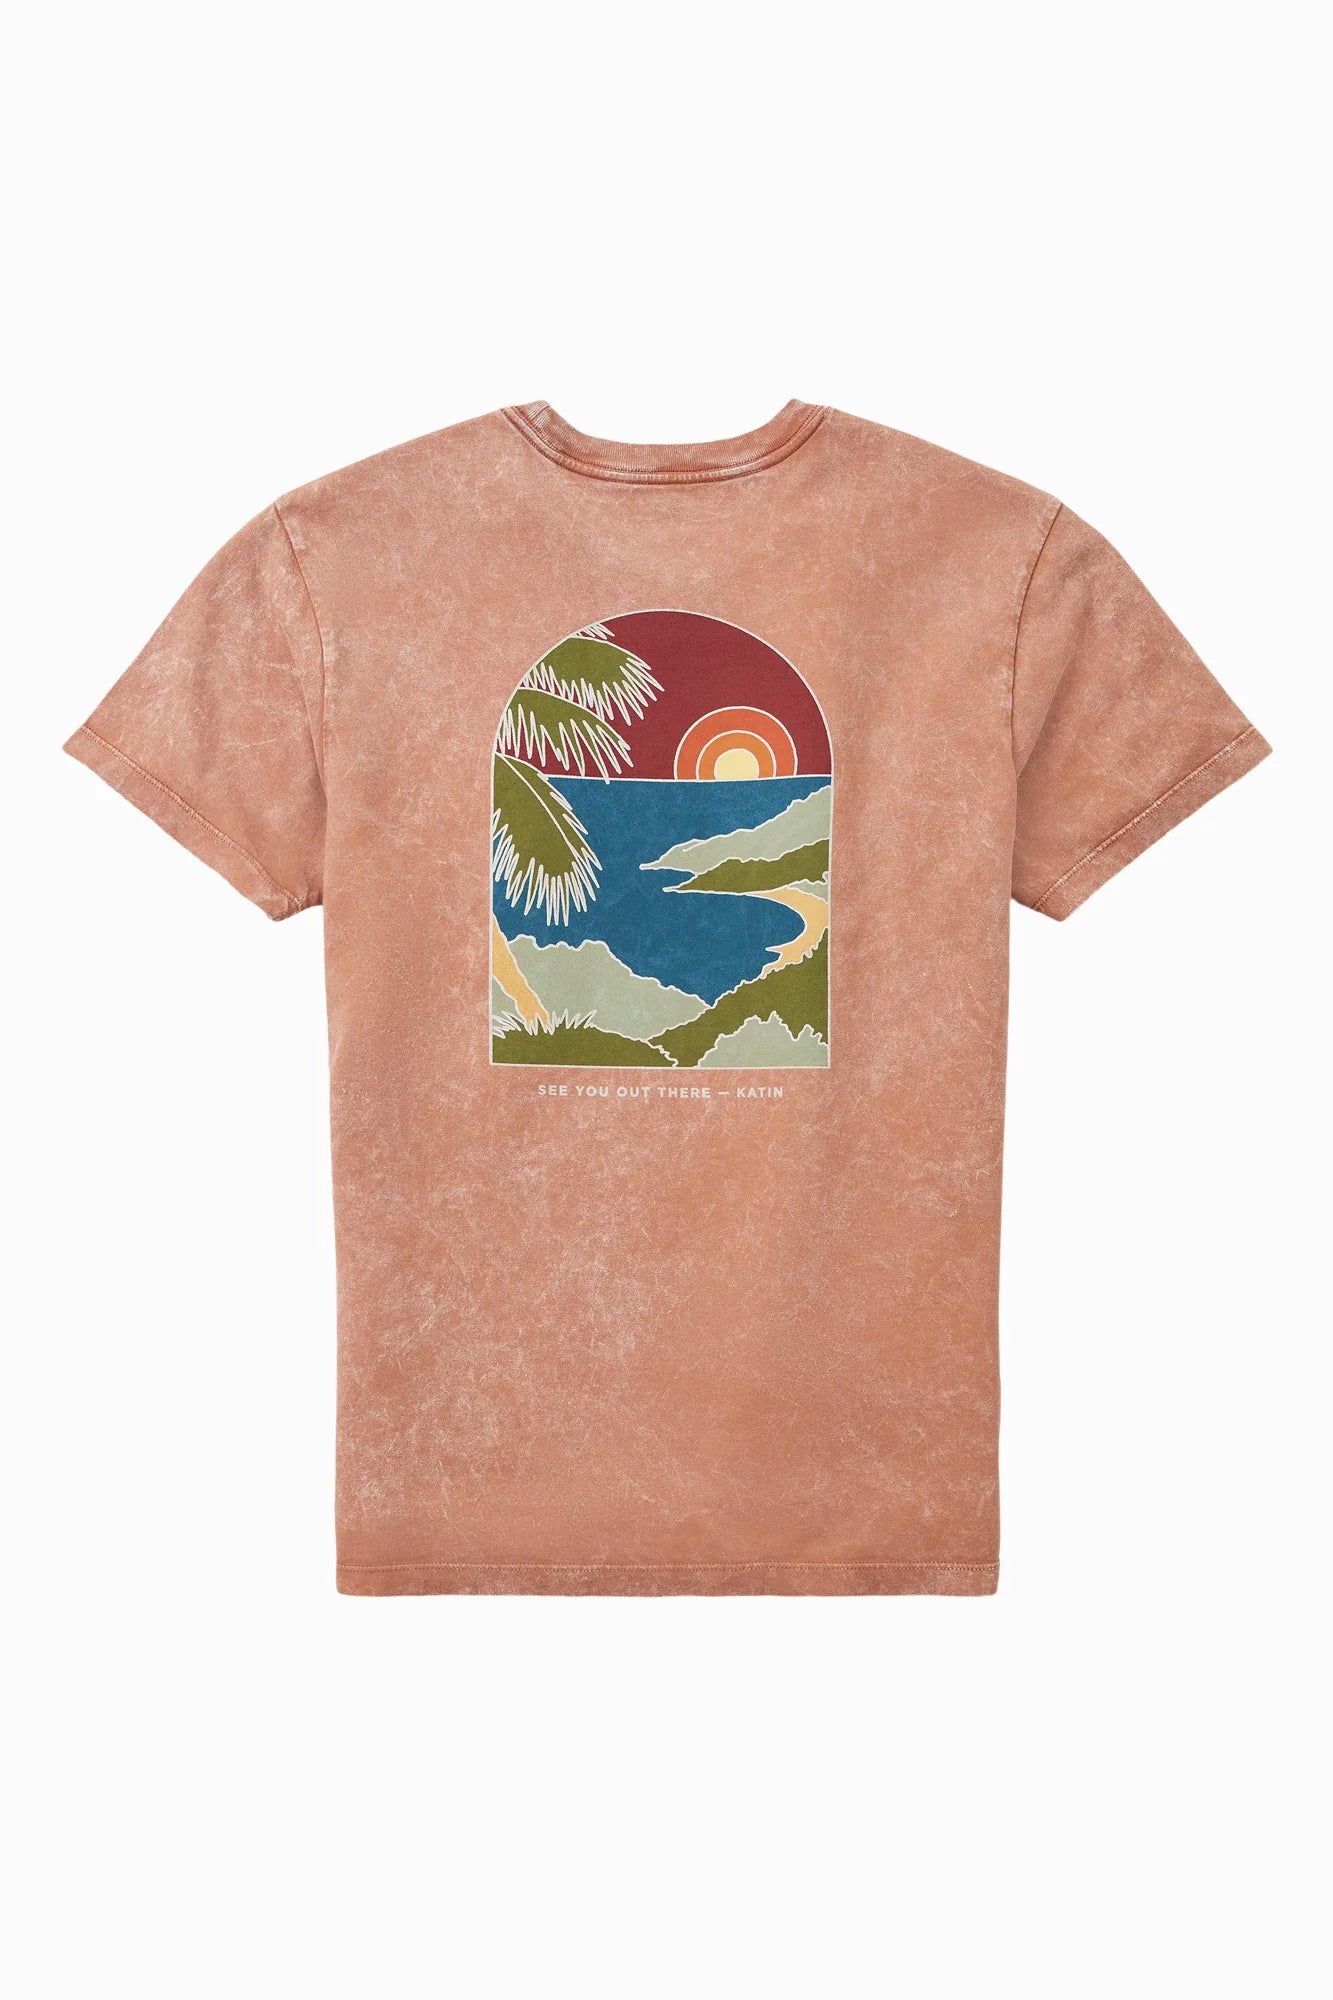 Voyage Tee - Red Fade Sand Wash